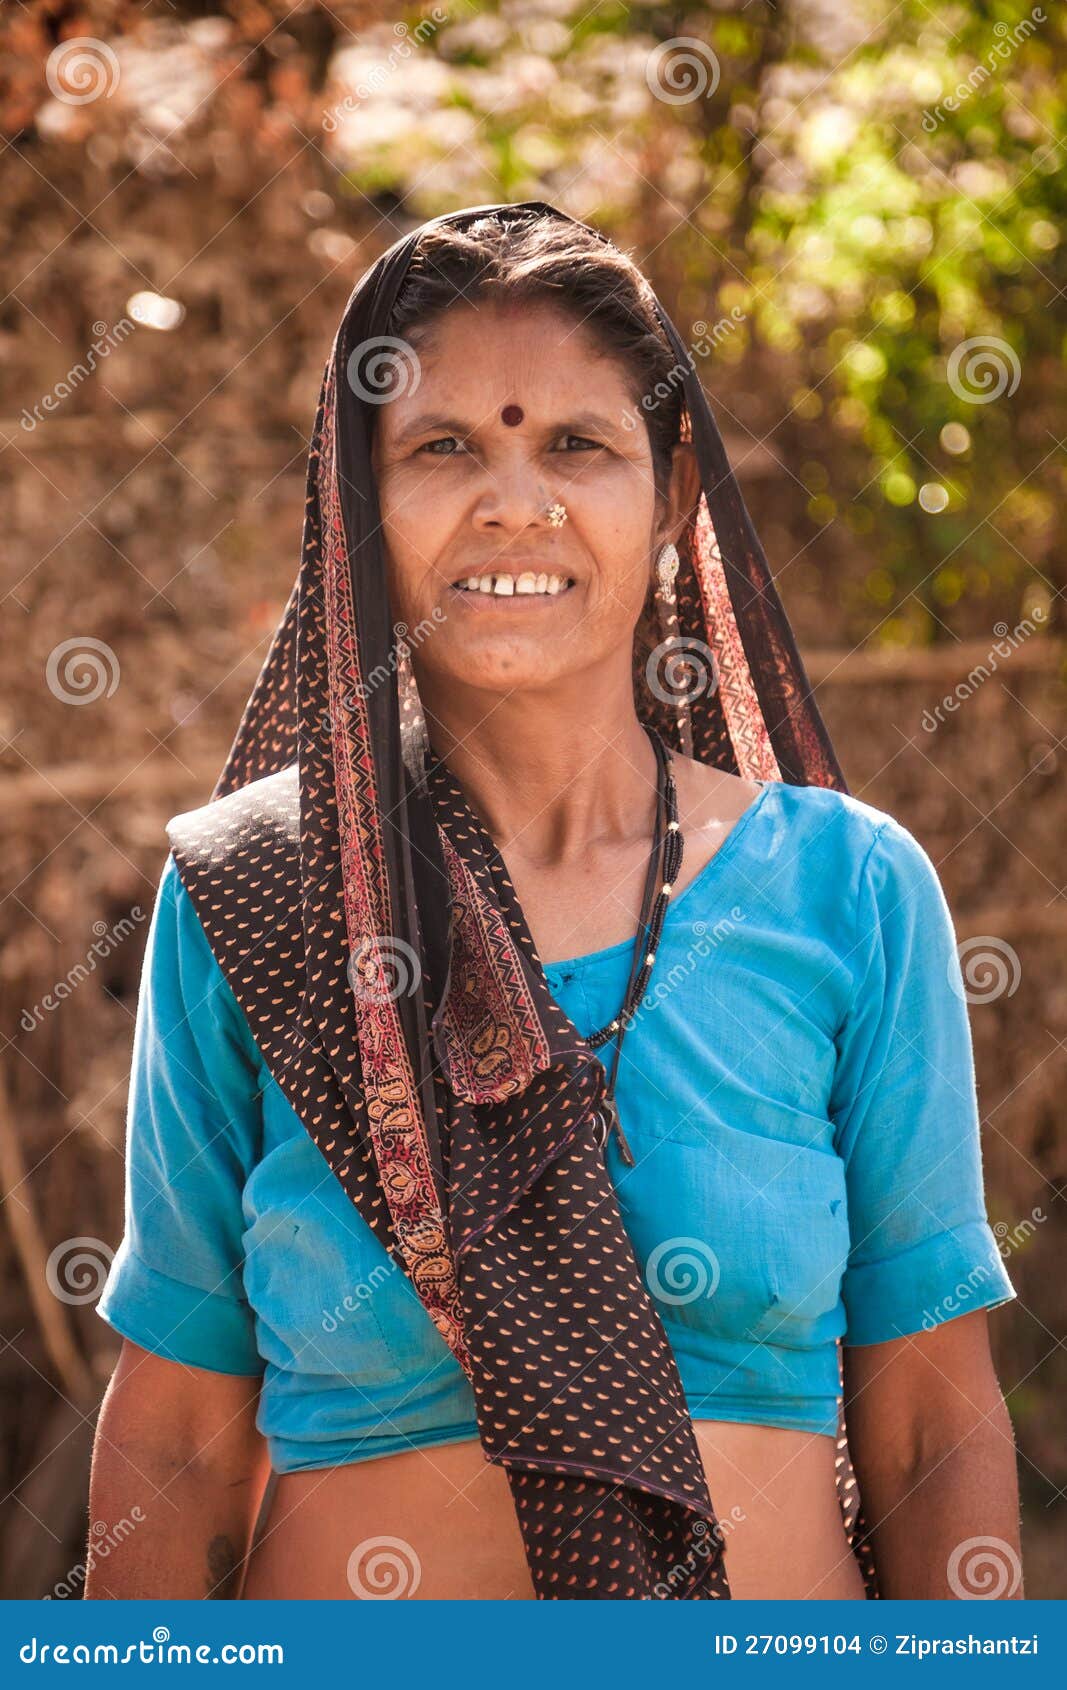 Middle Age Indian Villager Woman Smiling Stock Photo 